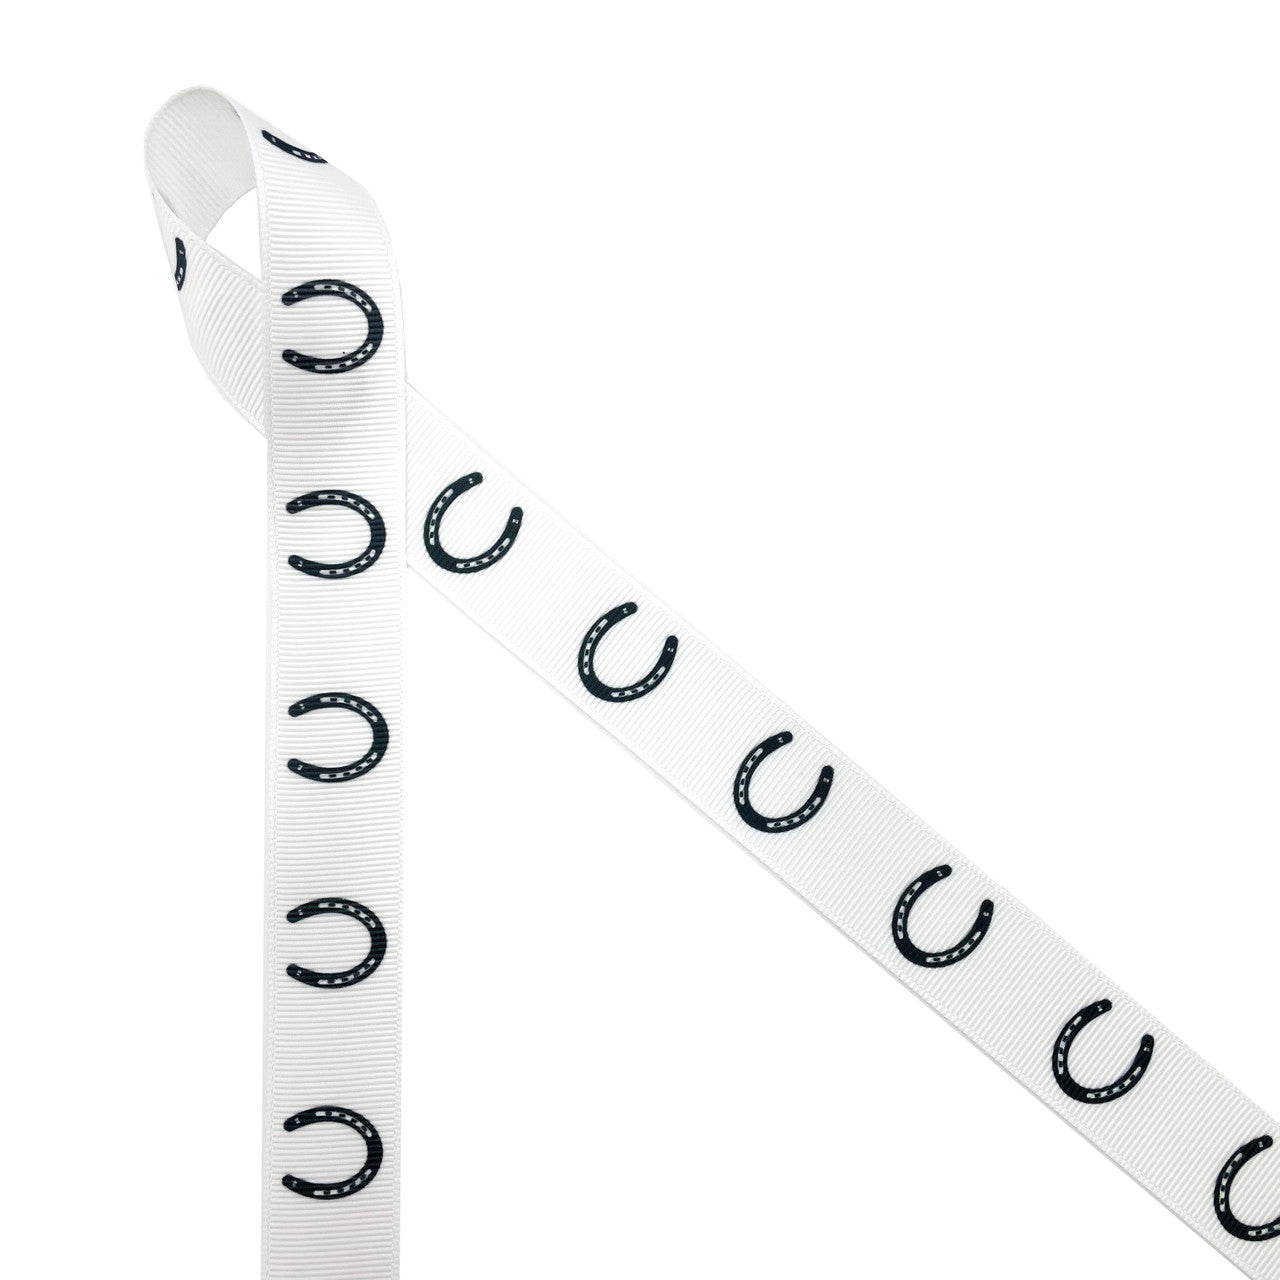 Equestrian ribbon horse shoes in a row in black printed on  7/8" white grosgrain,